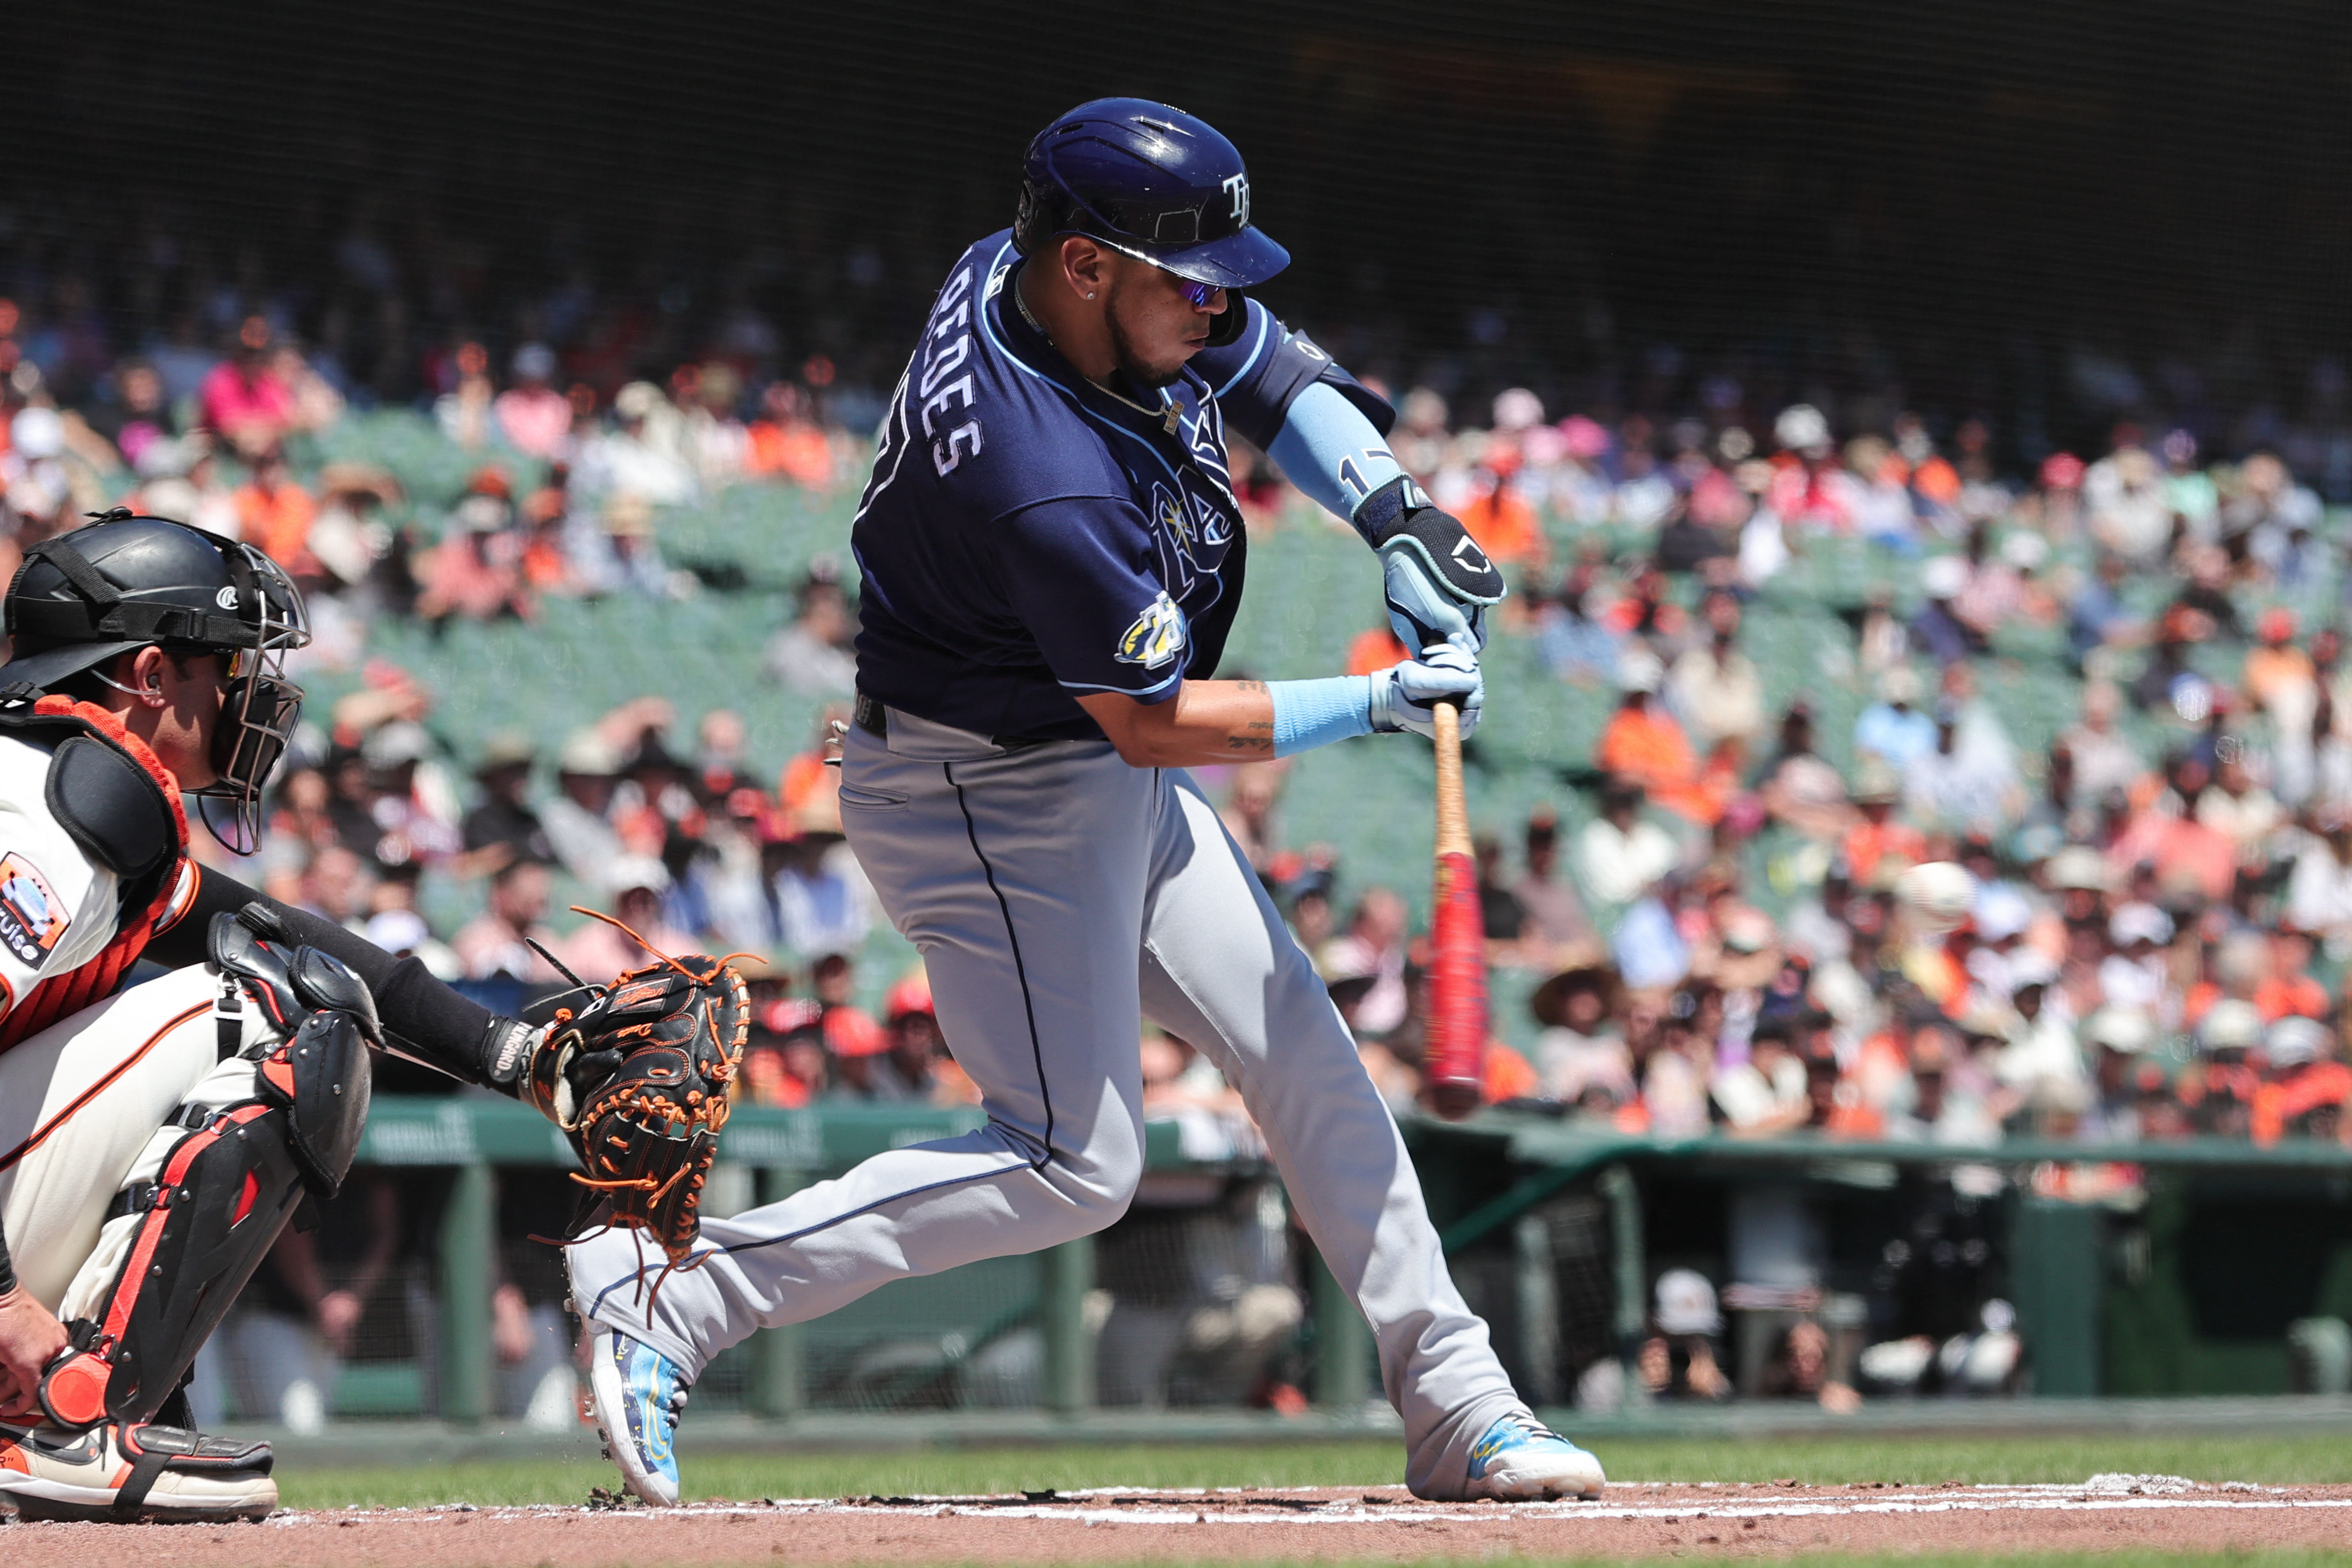 MLB - The Tampa Bay Rays held on to win for a massive